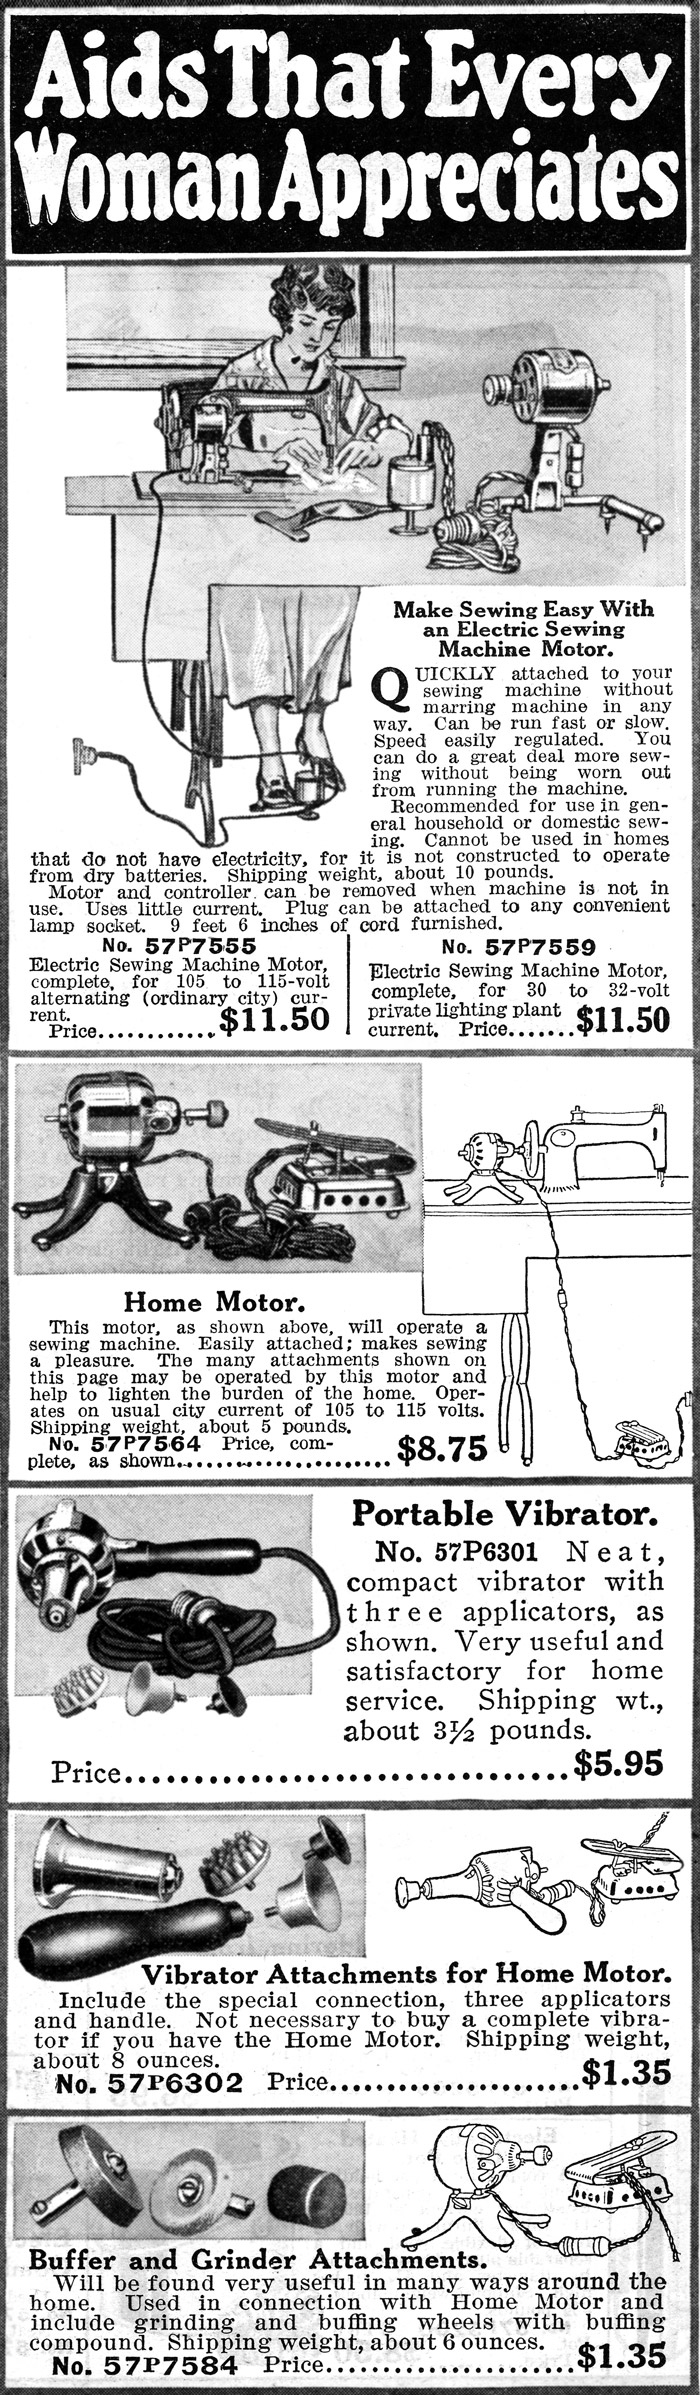 A page detail from a Sears, Roebuck and Company catalogue from nineteen eighteen, advertising a “home motor” with attachments for sewing and grinding, as well as those that allow it to be used as a vibrator. 